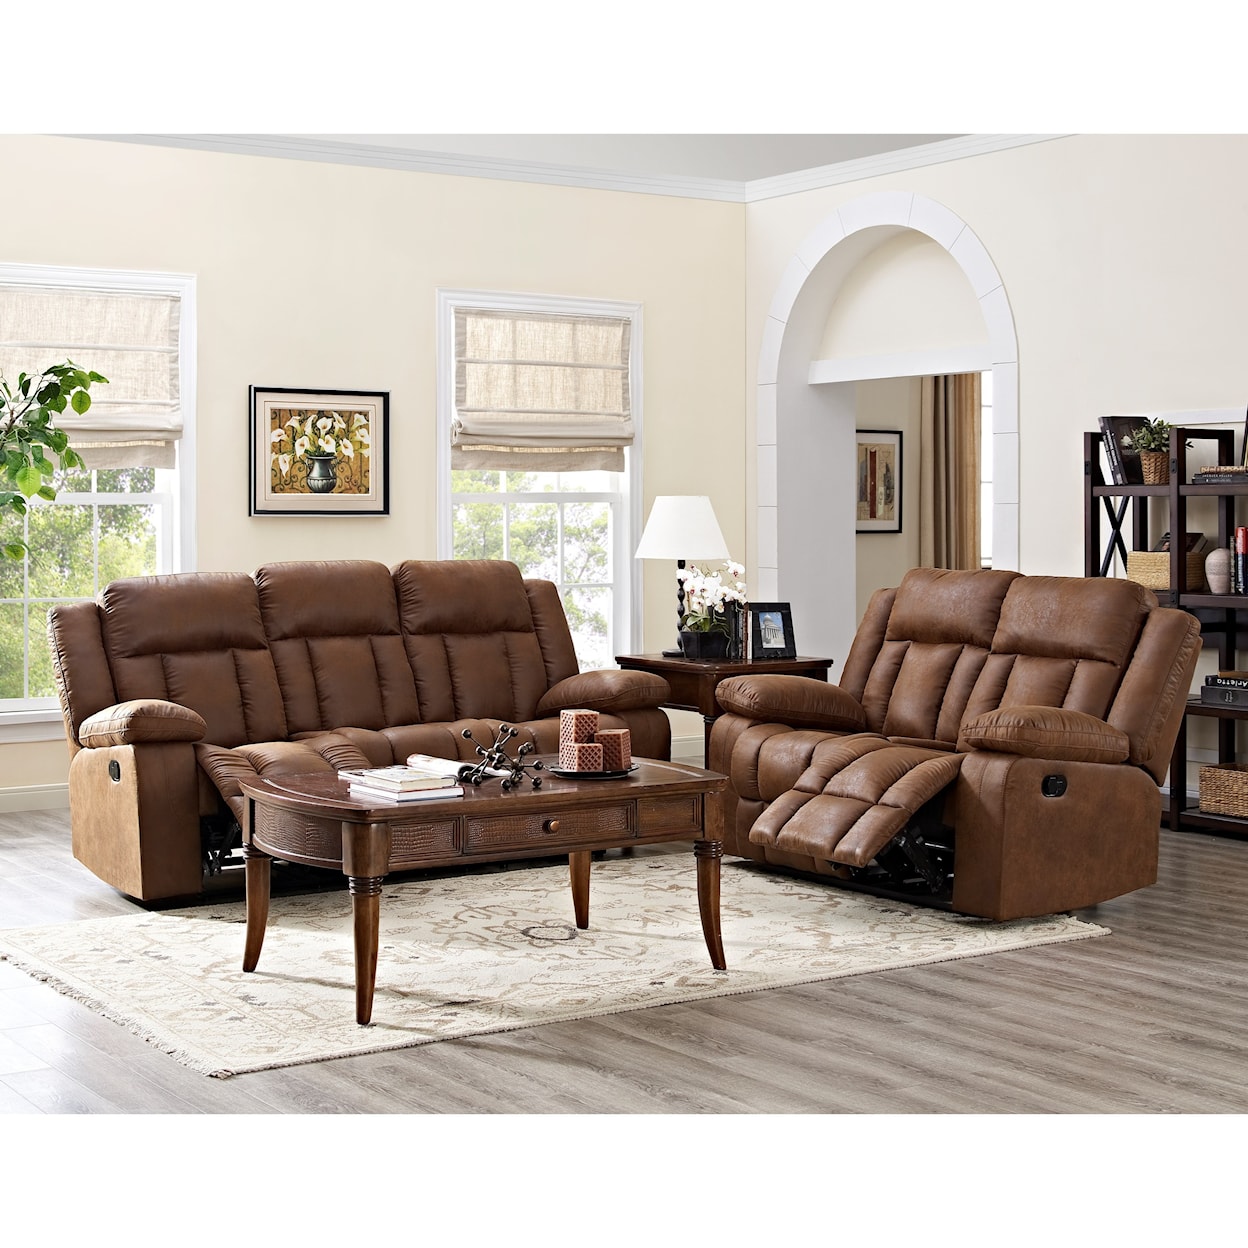 New Classic Hayes Power Reclining Loveseat